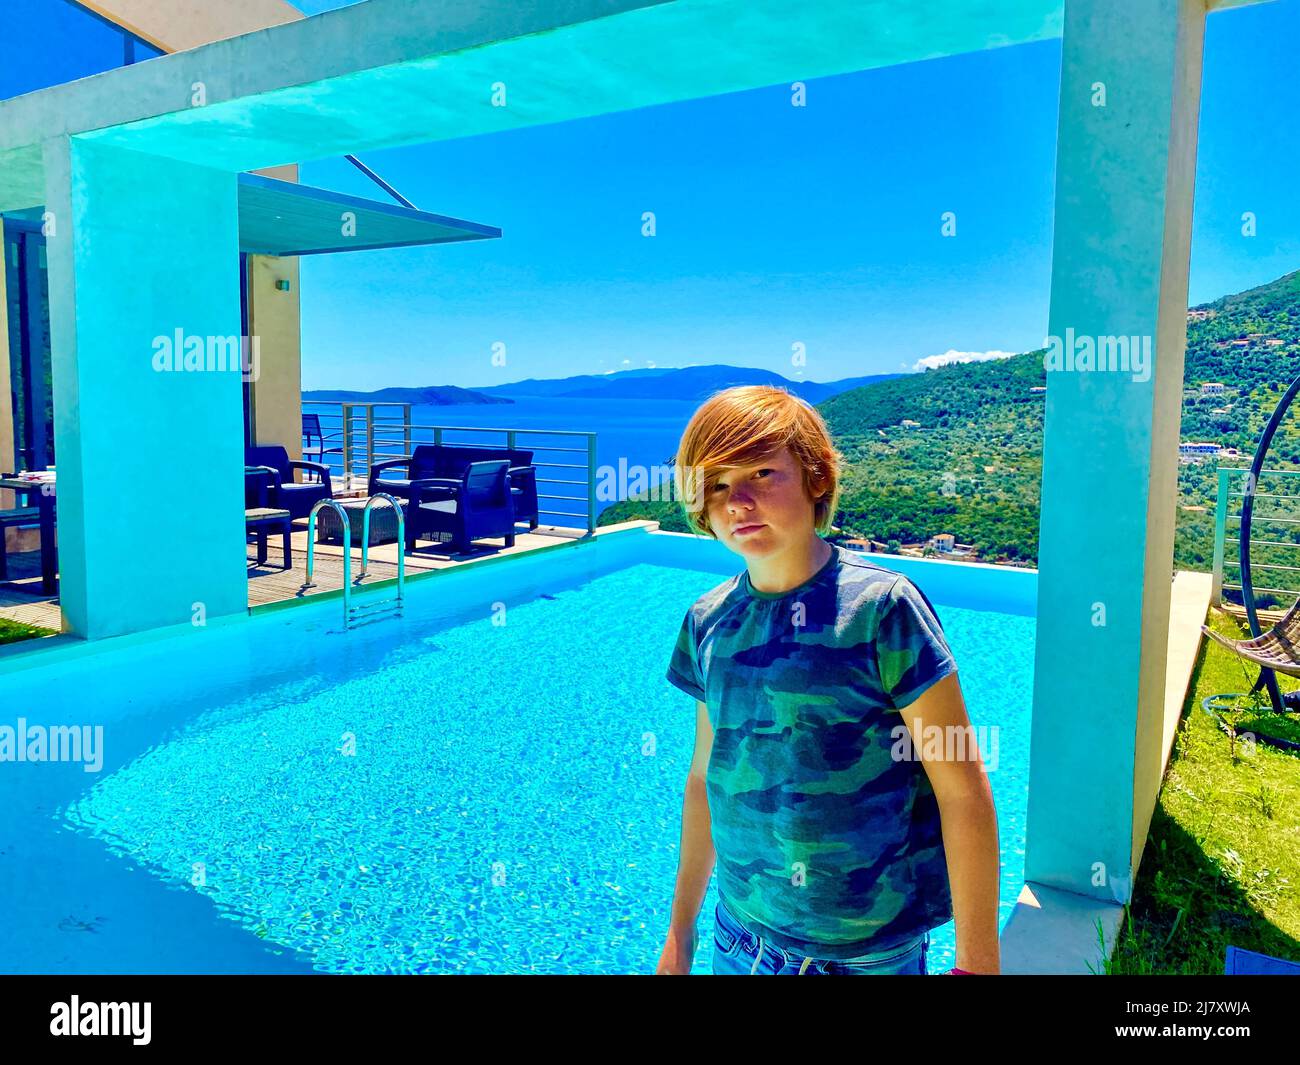 A you boy with red hair by a swimming pool, Greece Stock Photo